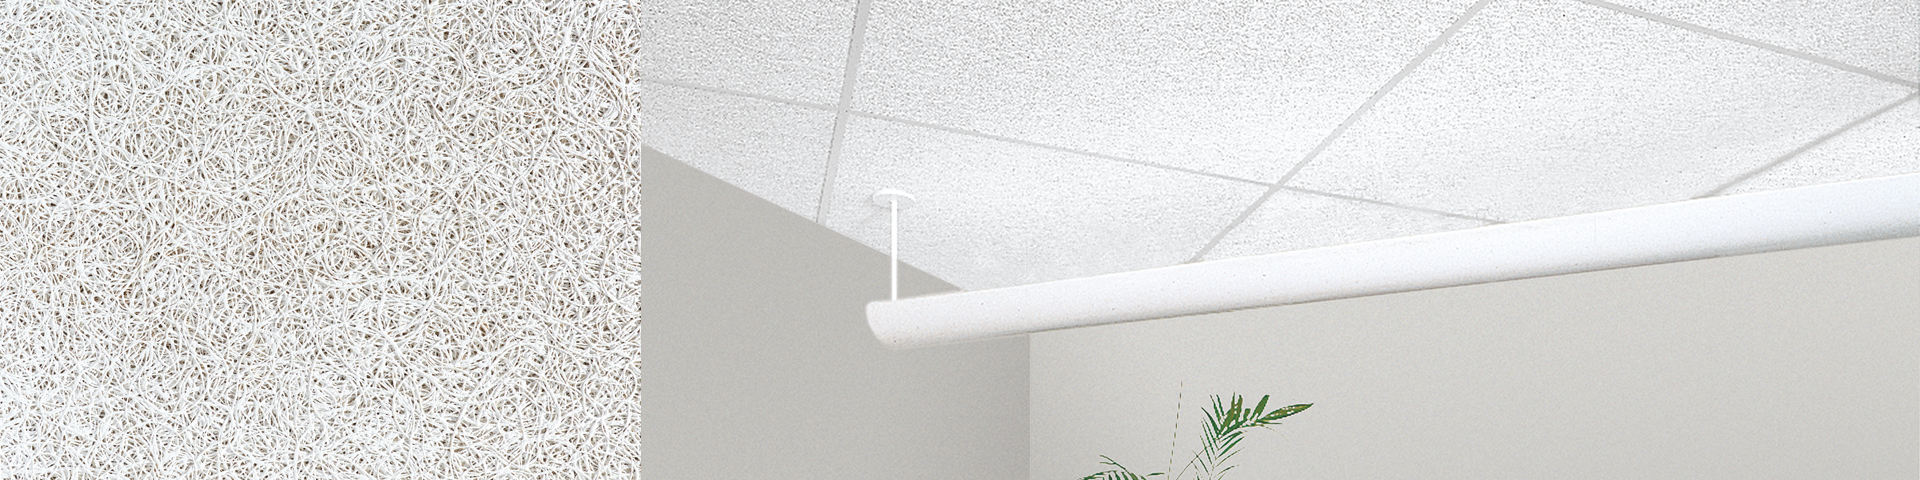 Acoustic Ceilings for Suspended Ceiling Grid; Drop Ceiling Tiles Direct from the Manufacturer; TECTUM Item 8183T10TNA Armstrong Ceiling Tiles; 2x4 Ceiling Tiles 4 pcs Natural Lay-in 